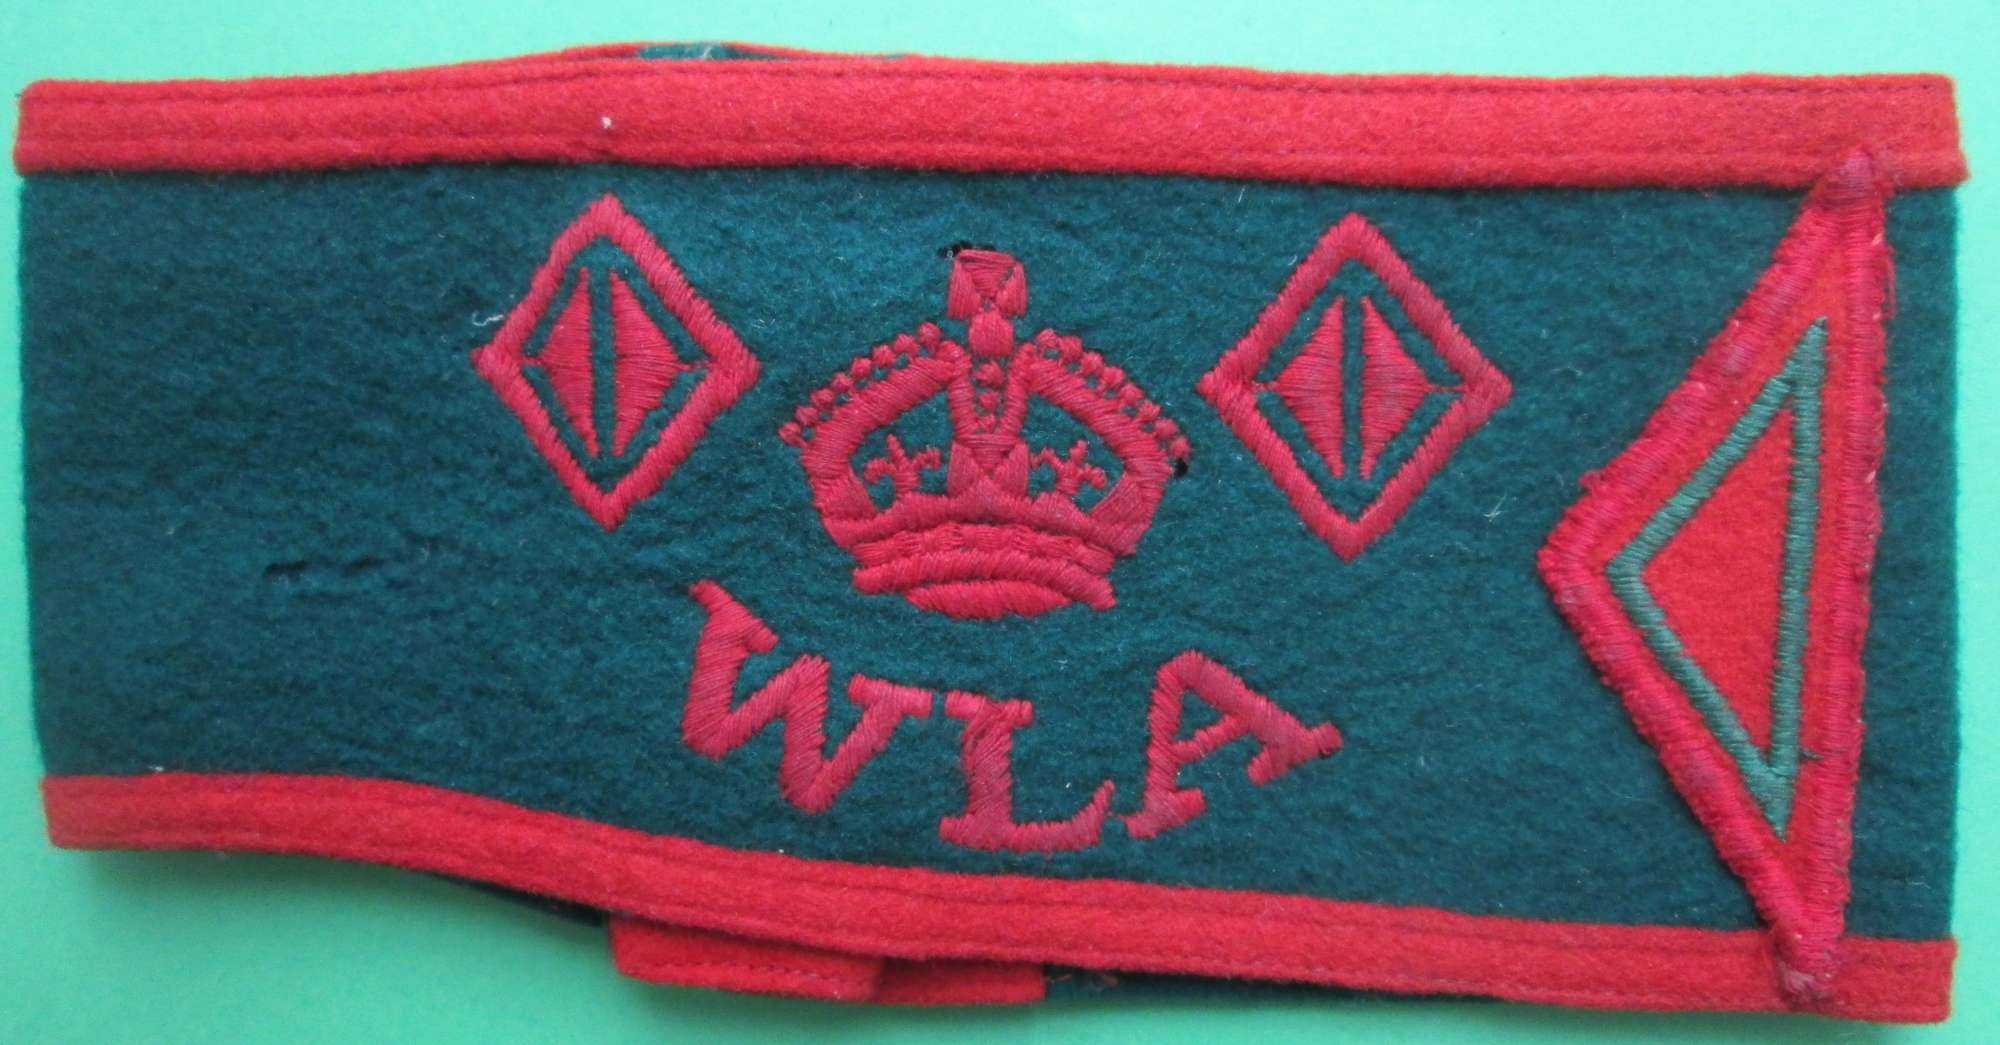 A WWII WOMAN'S LAND ARMY ARMBAND 2.5 YEARS SERVICE EXAMPLE